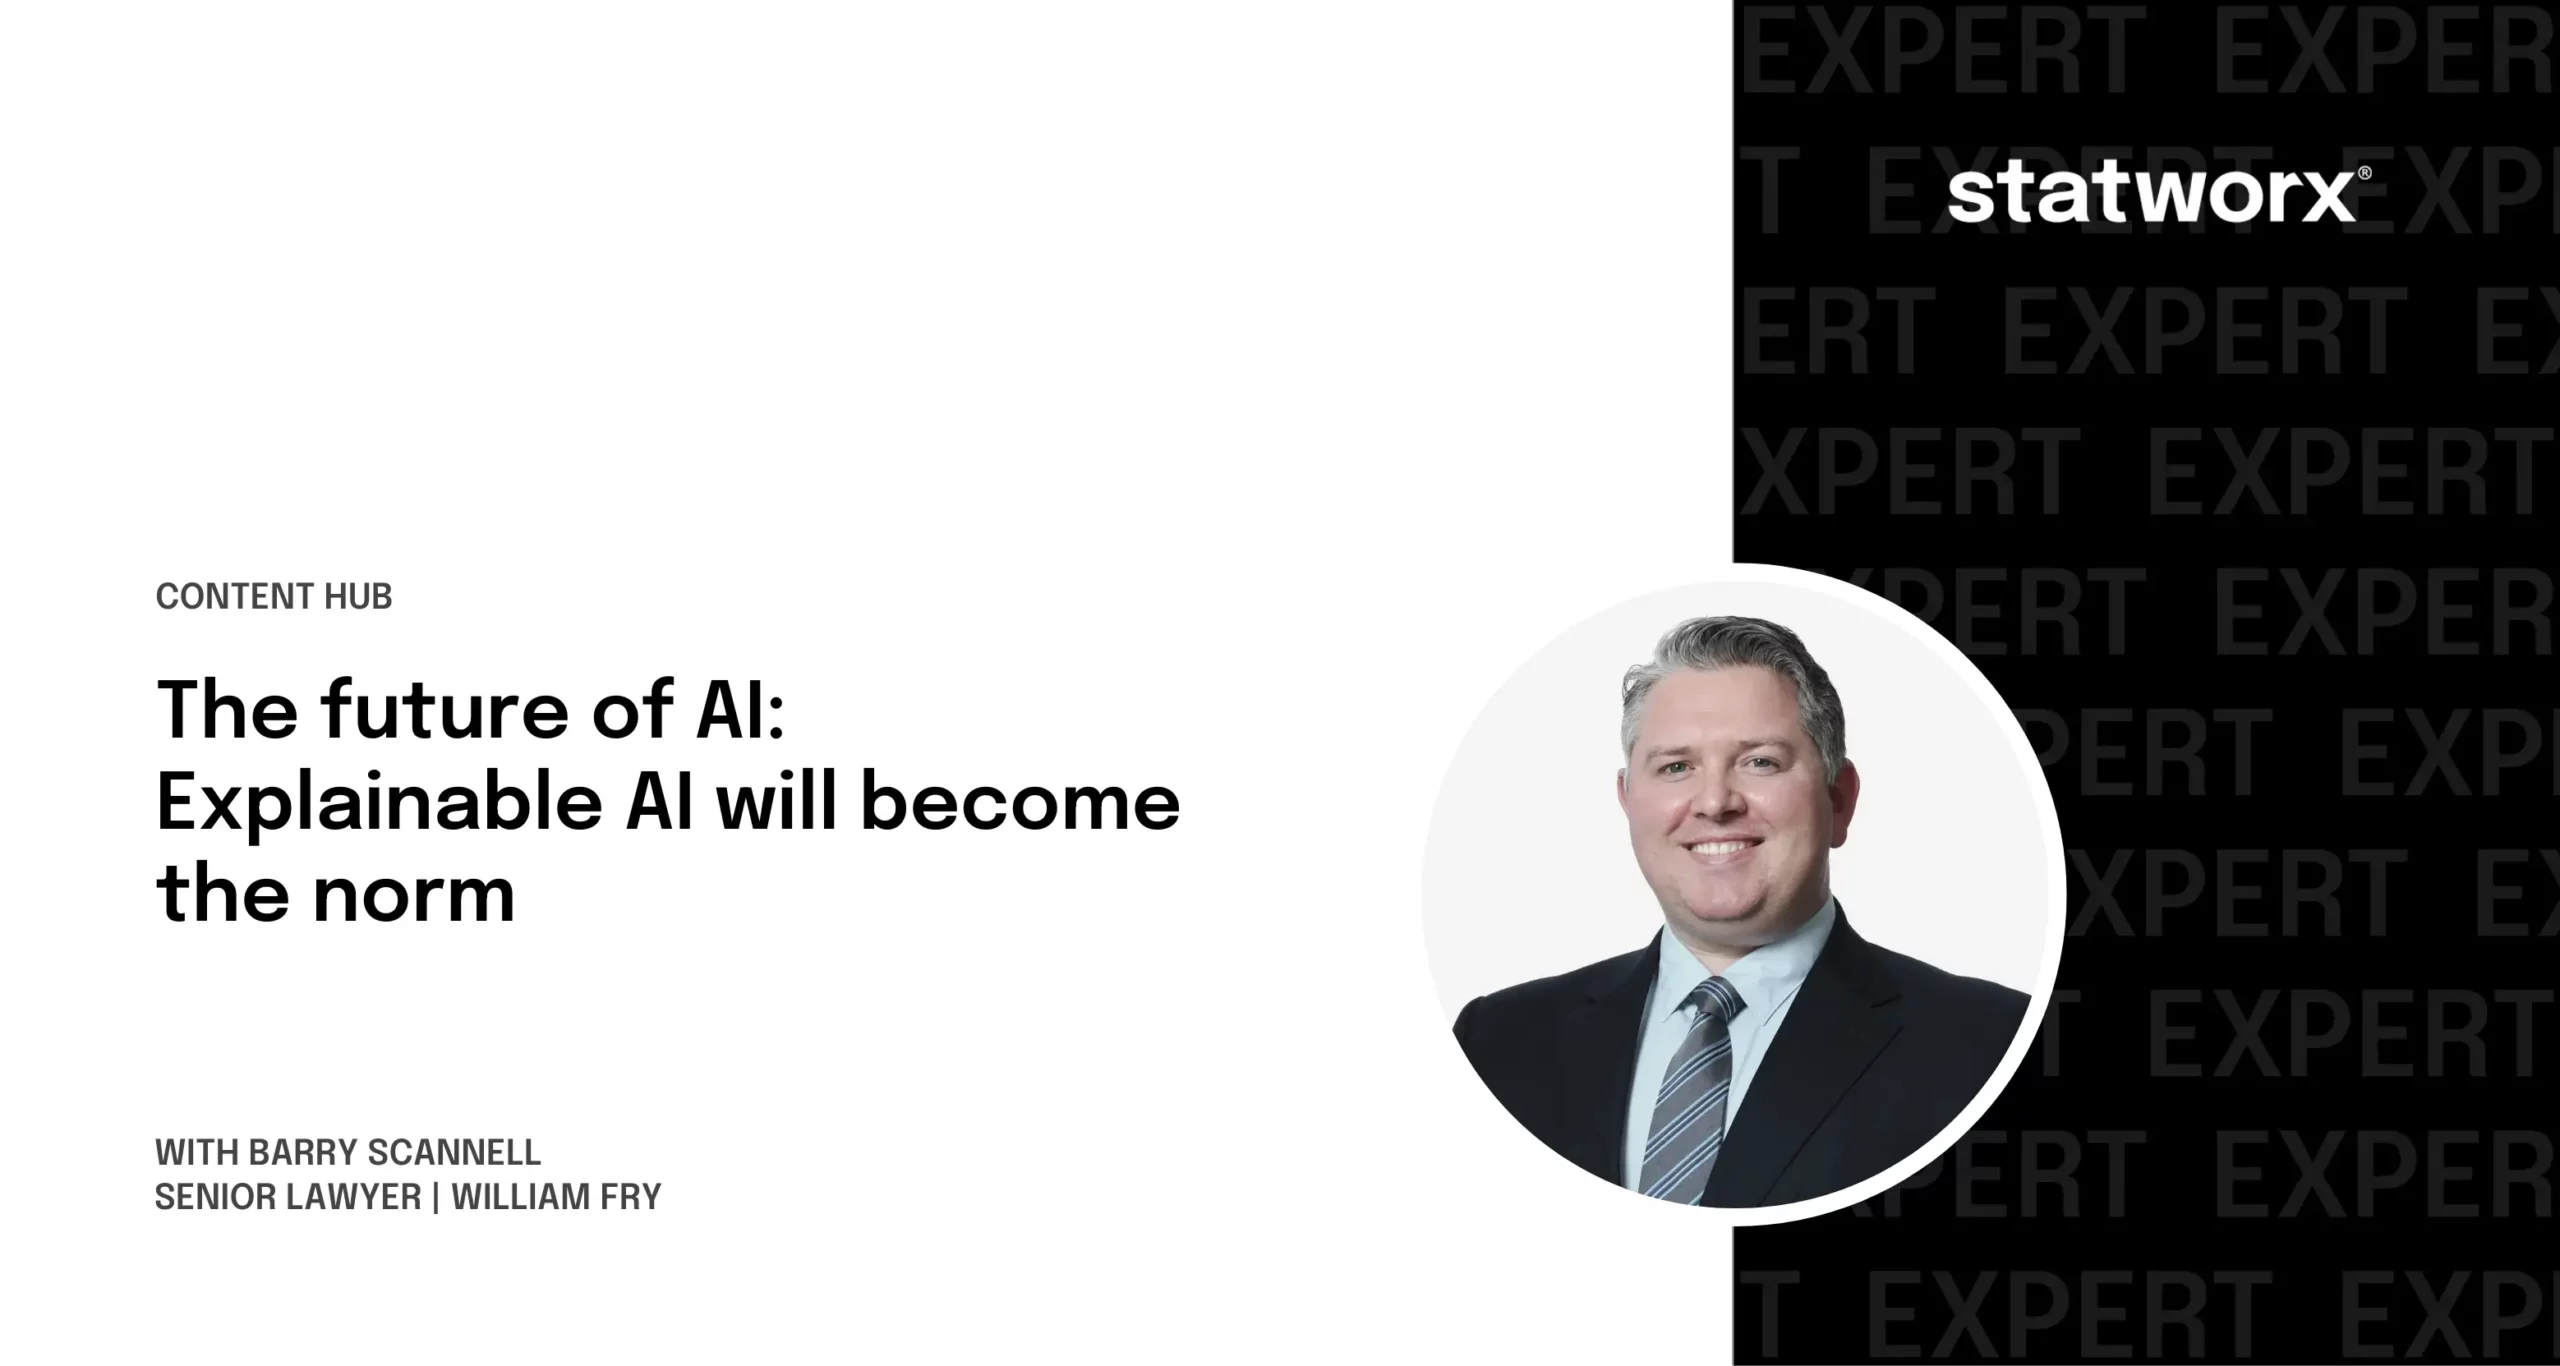 The future of AI: Explainable AI will become the norm